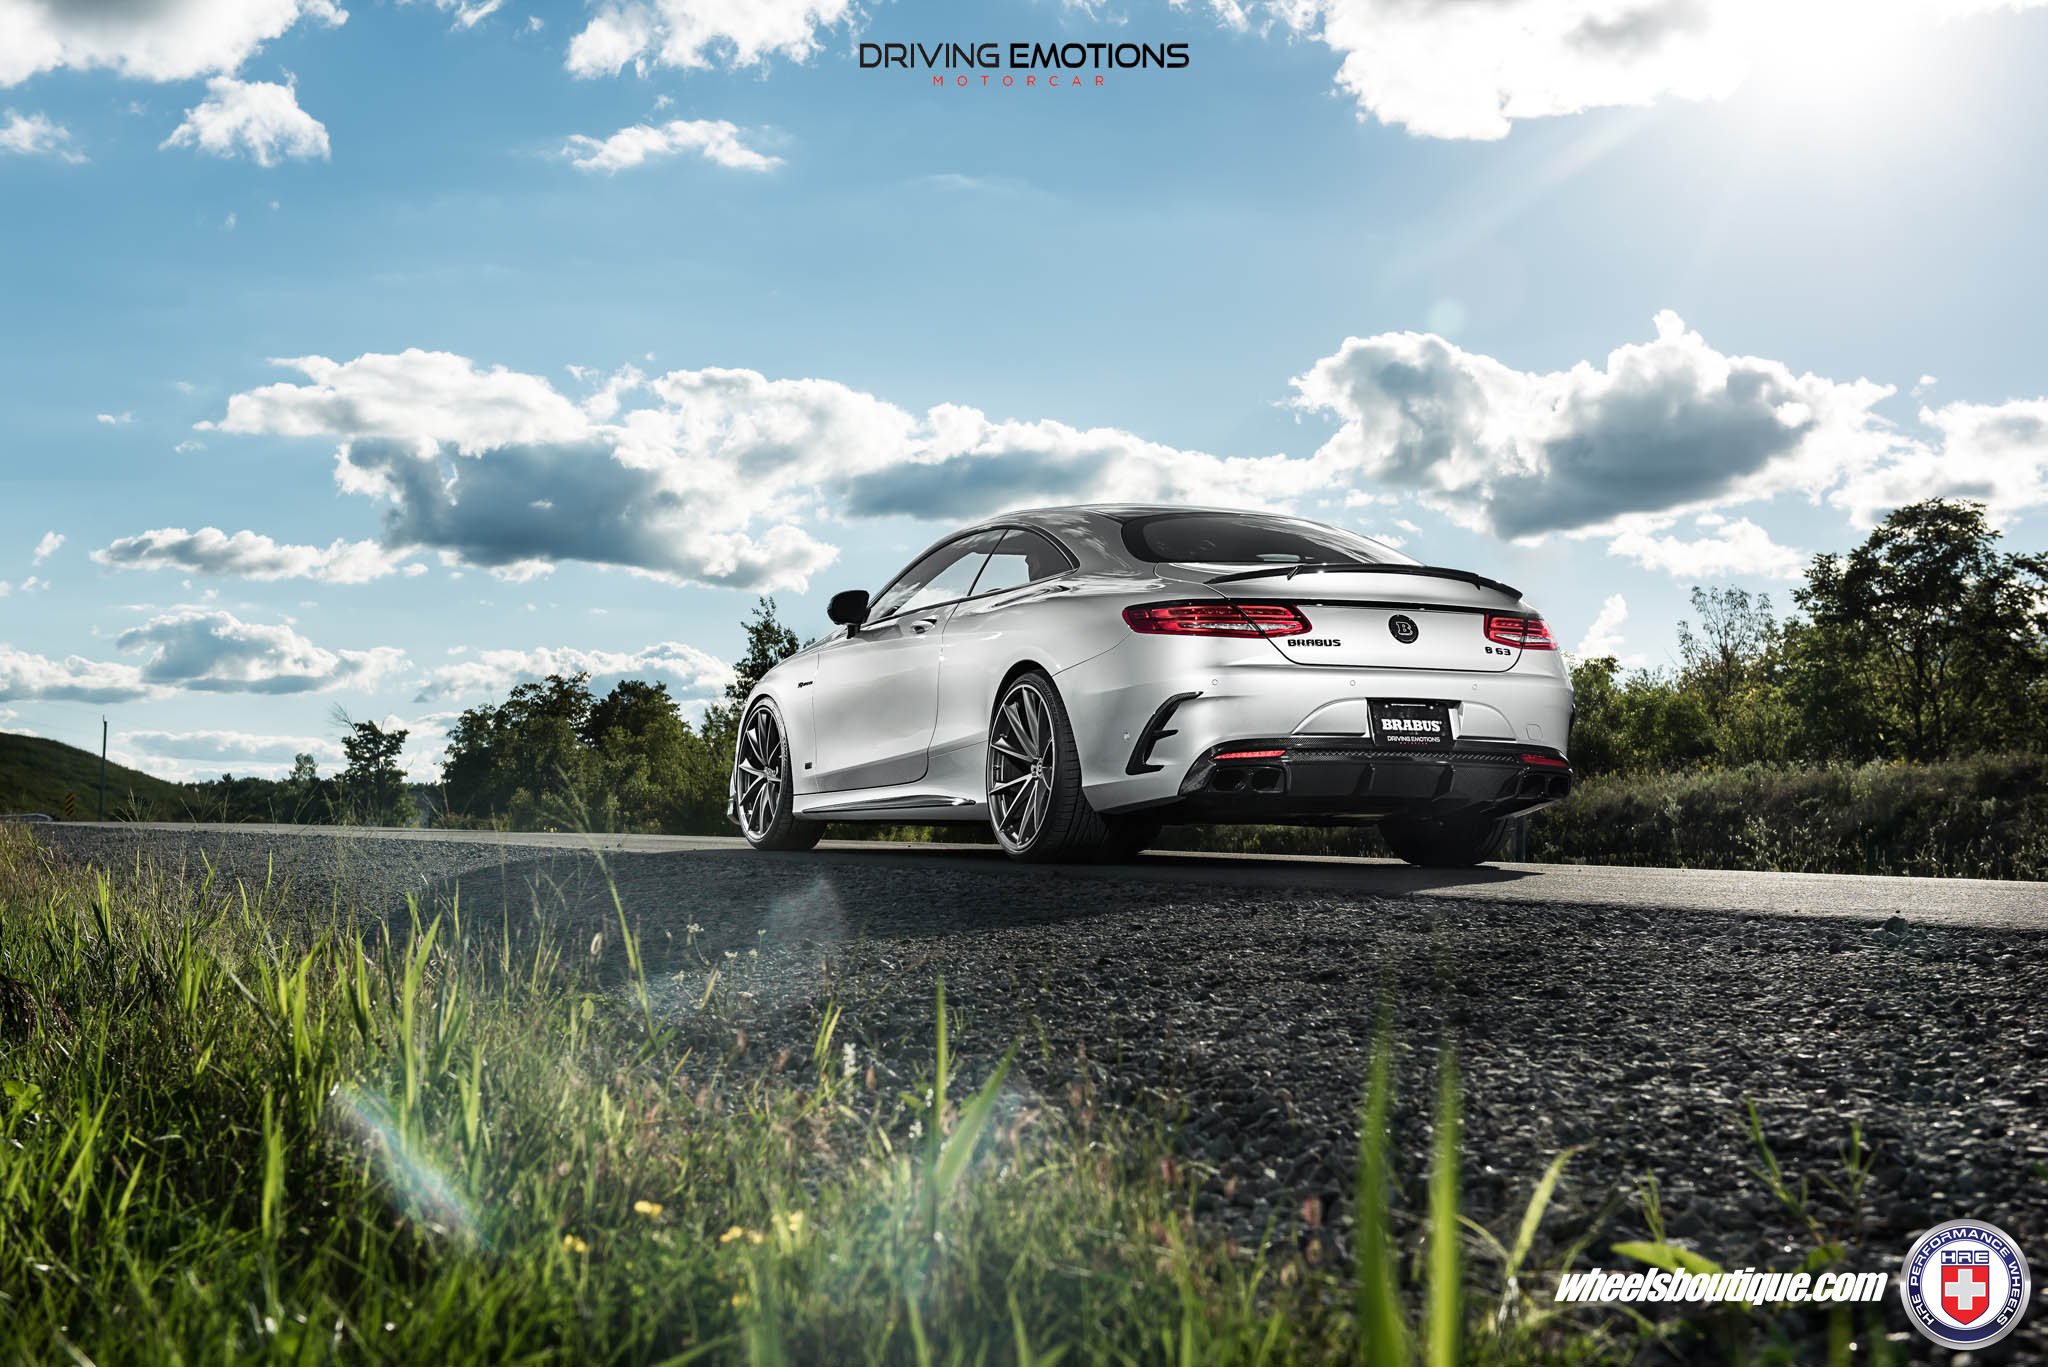 hre, Wheels, Cars, Mercedes, S63, Coupe, Silver Wallpaper